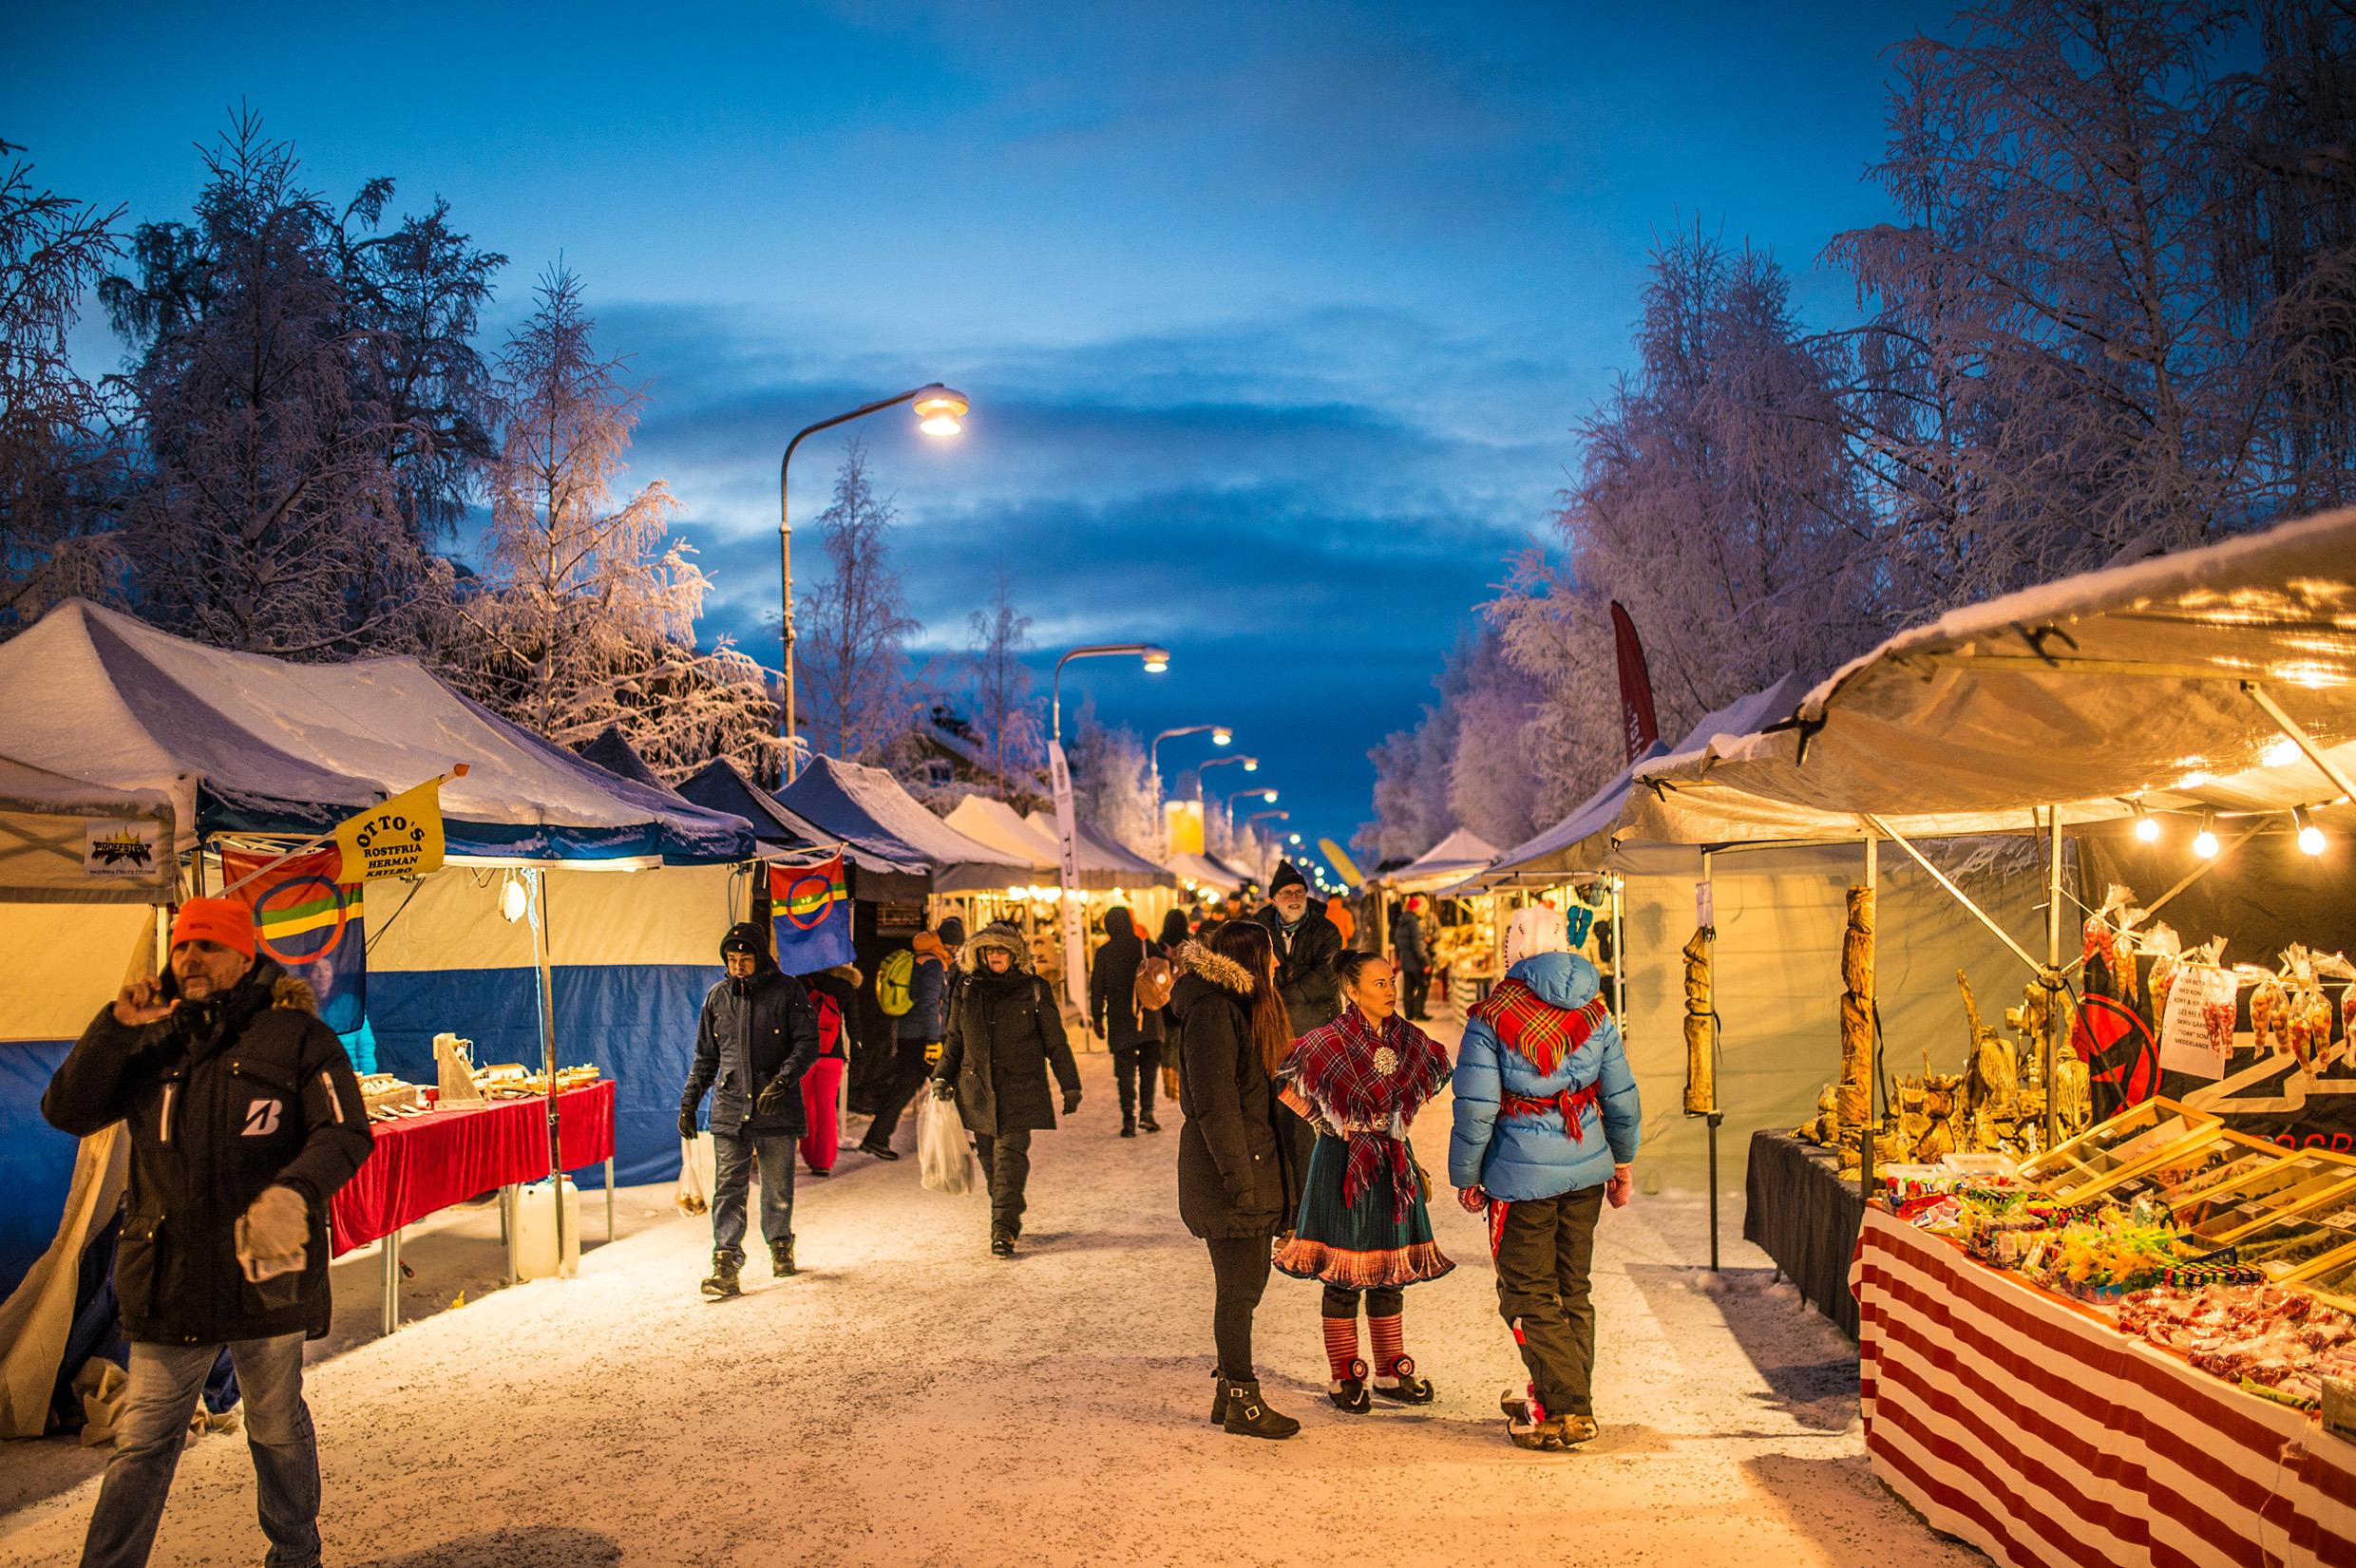 People at an outdoor market in the snow.